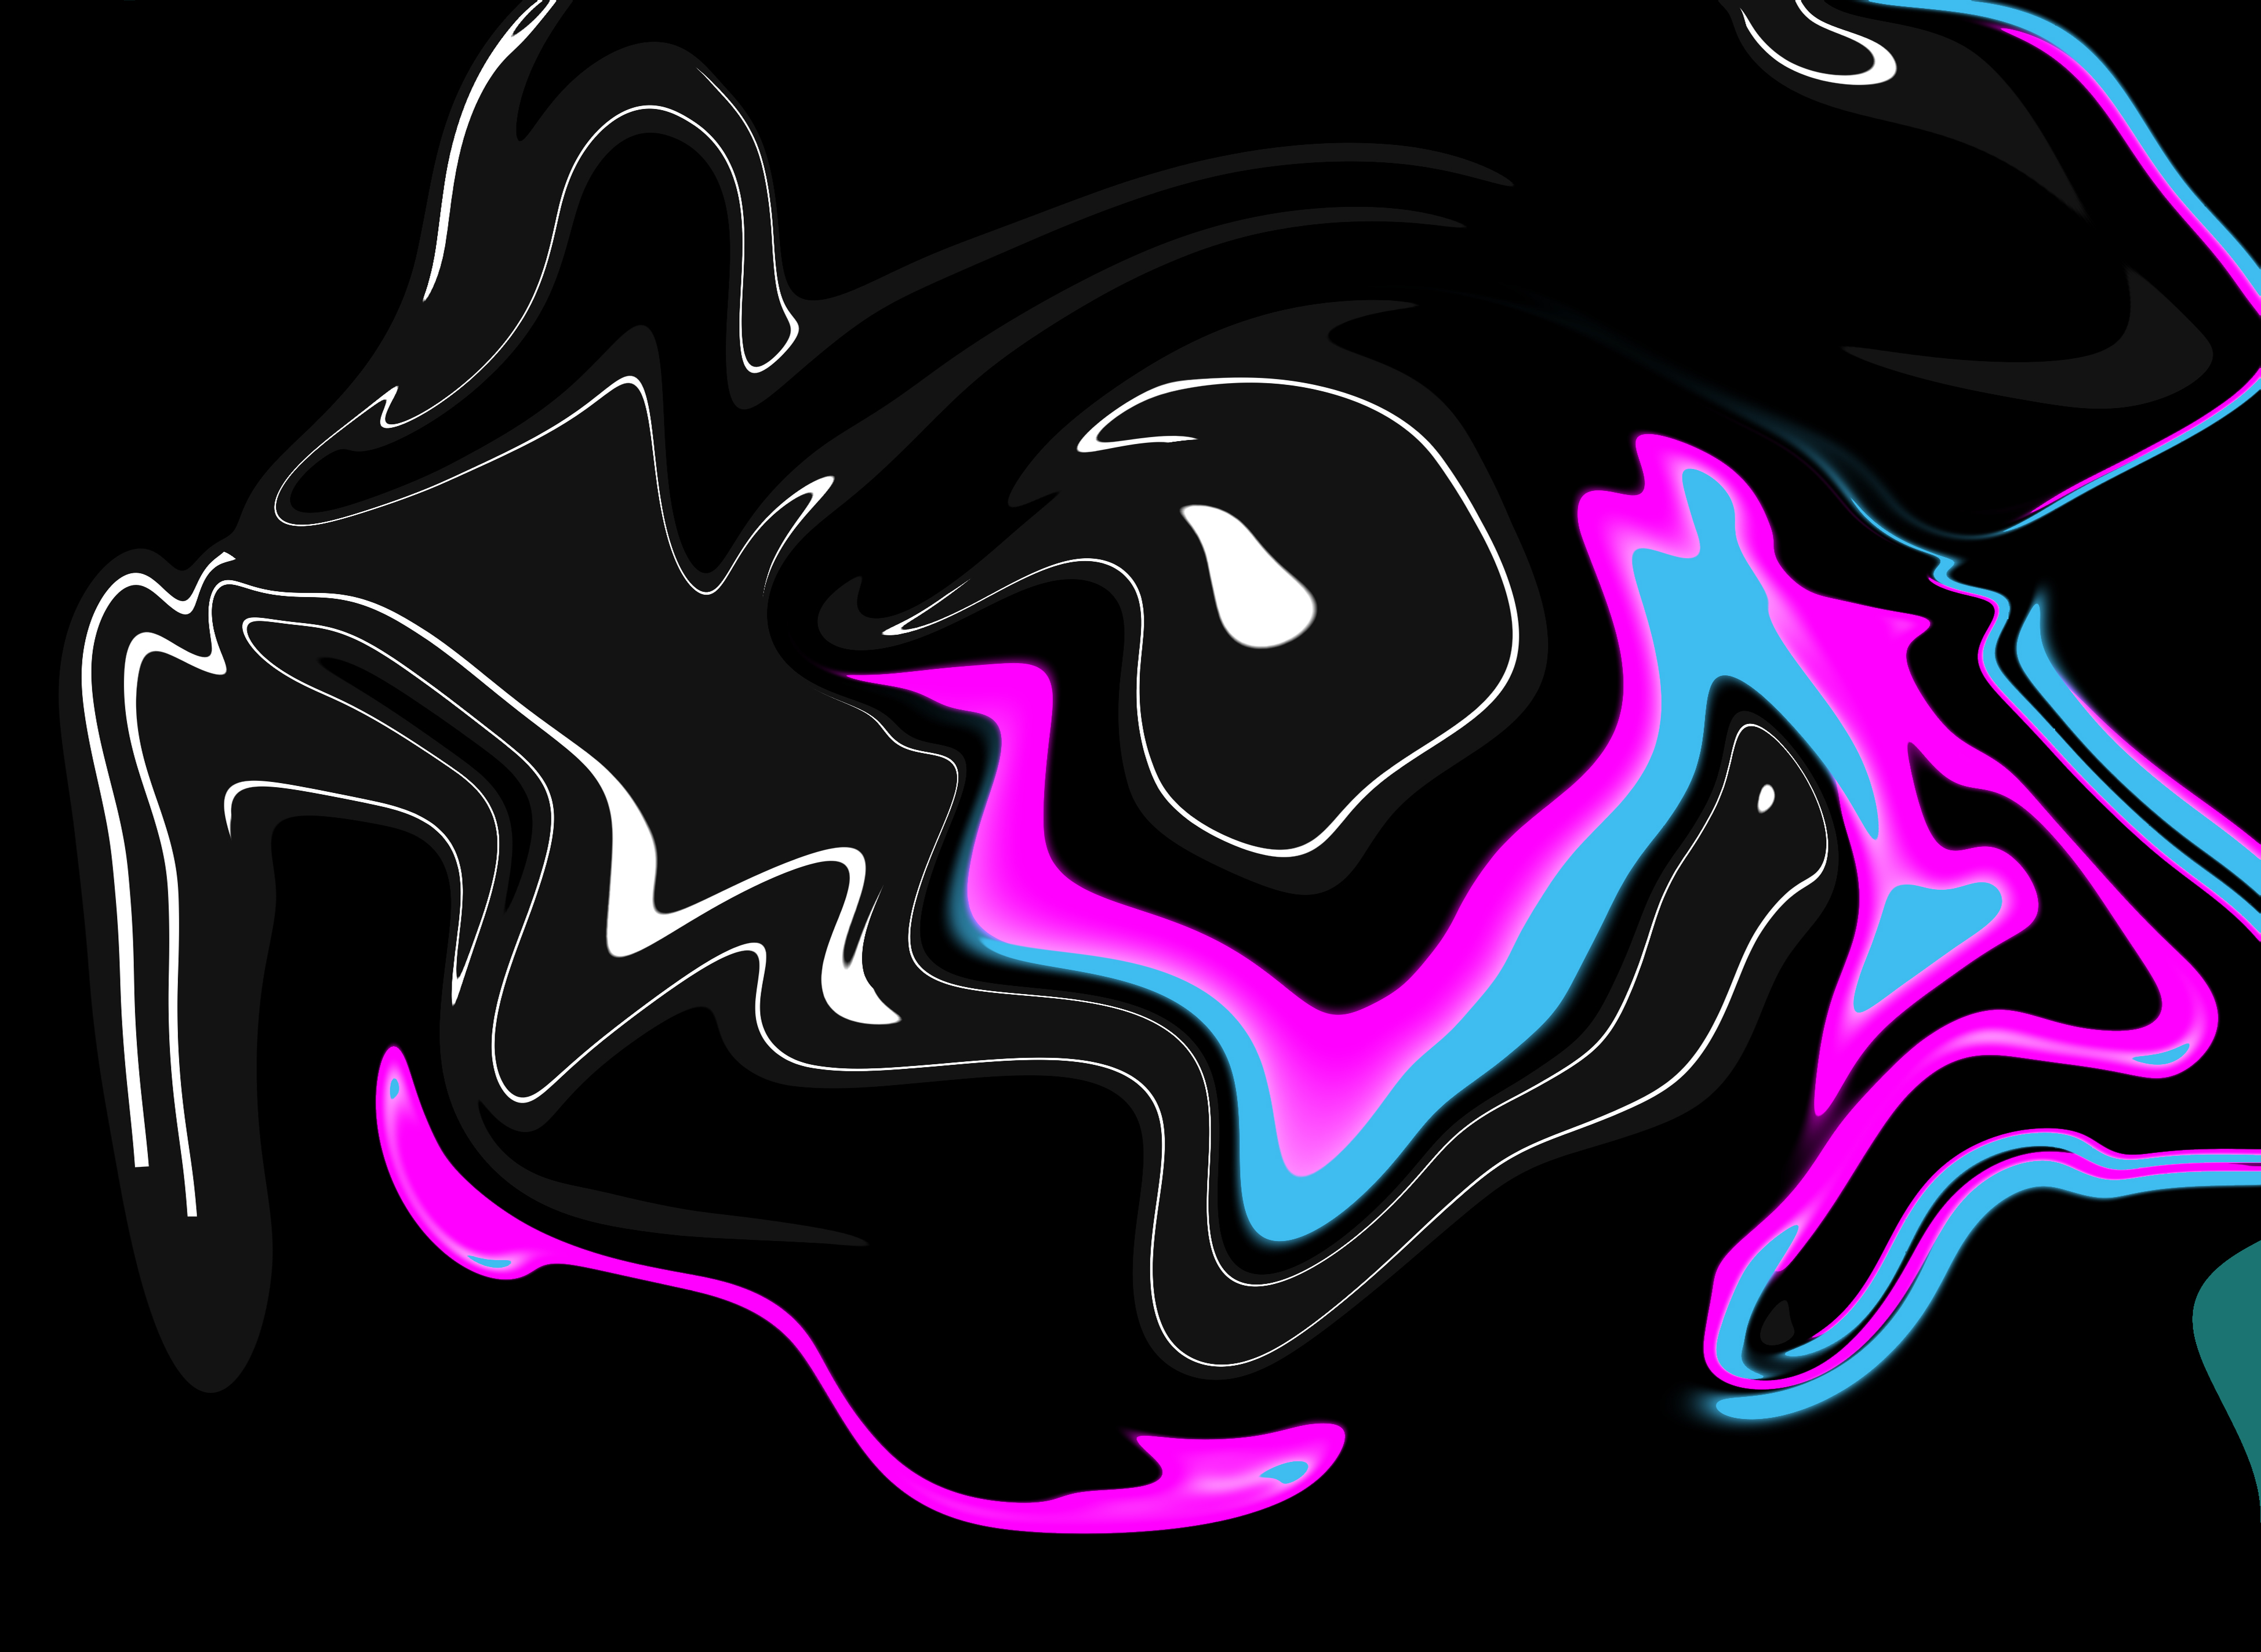 Abstract Neon Shapes Swirls Black Background Simple Background Artwork 3900x2850